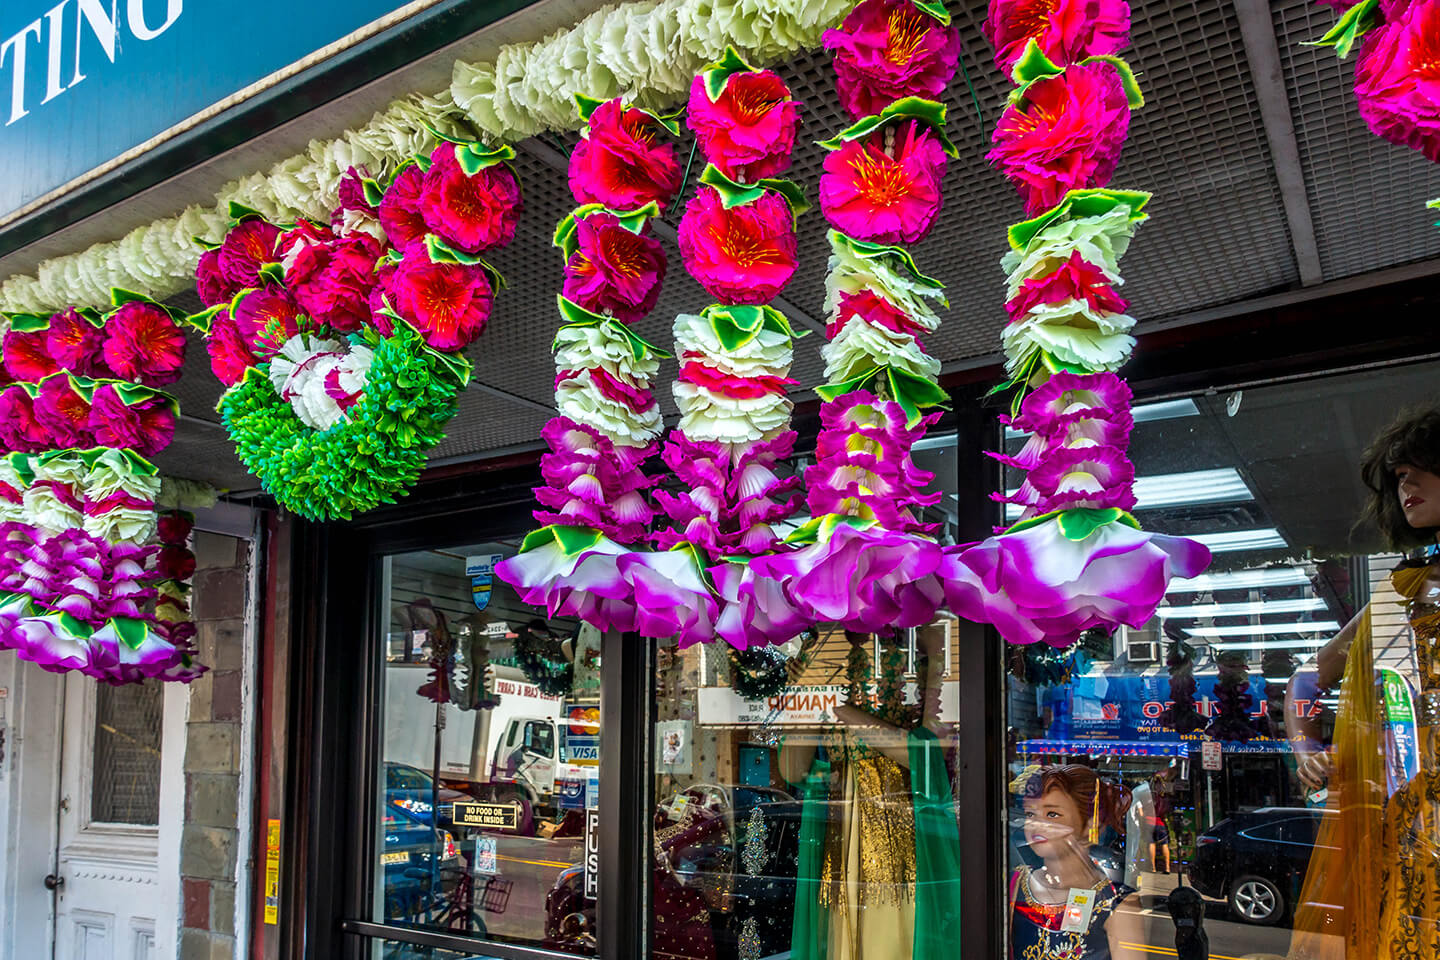 hanging-flowers-india-square-journal-square-jersey-city